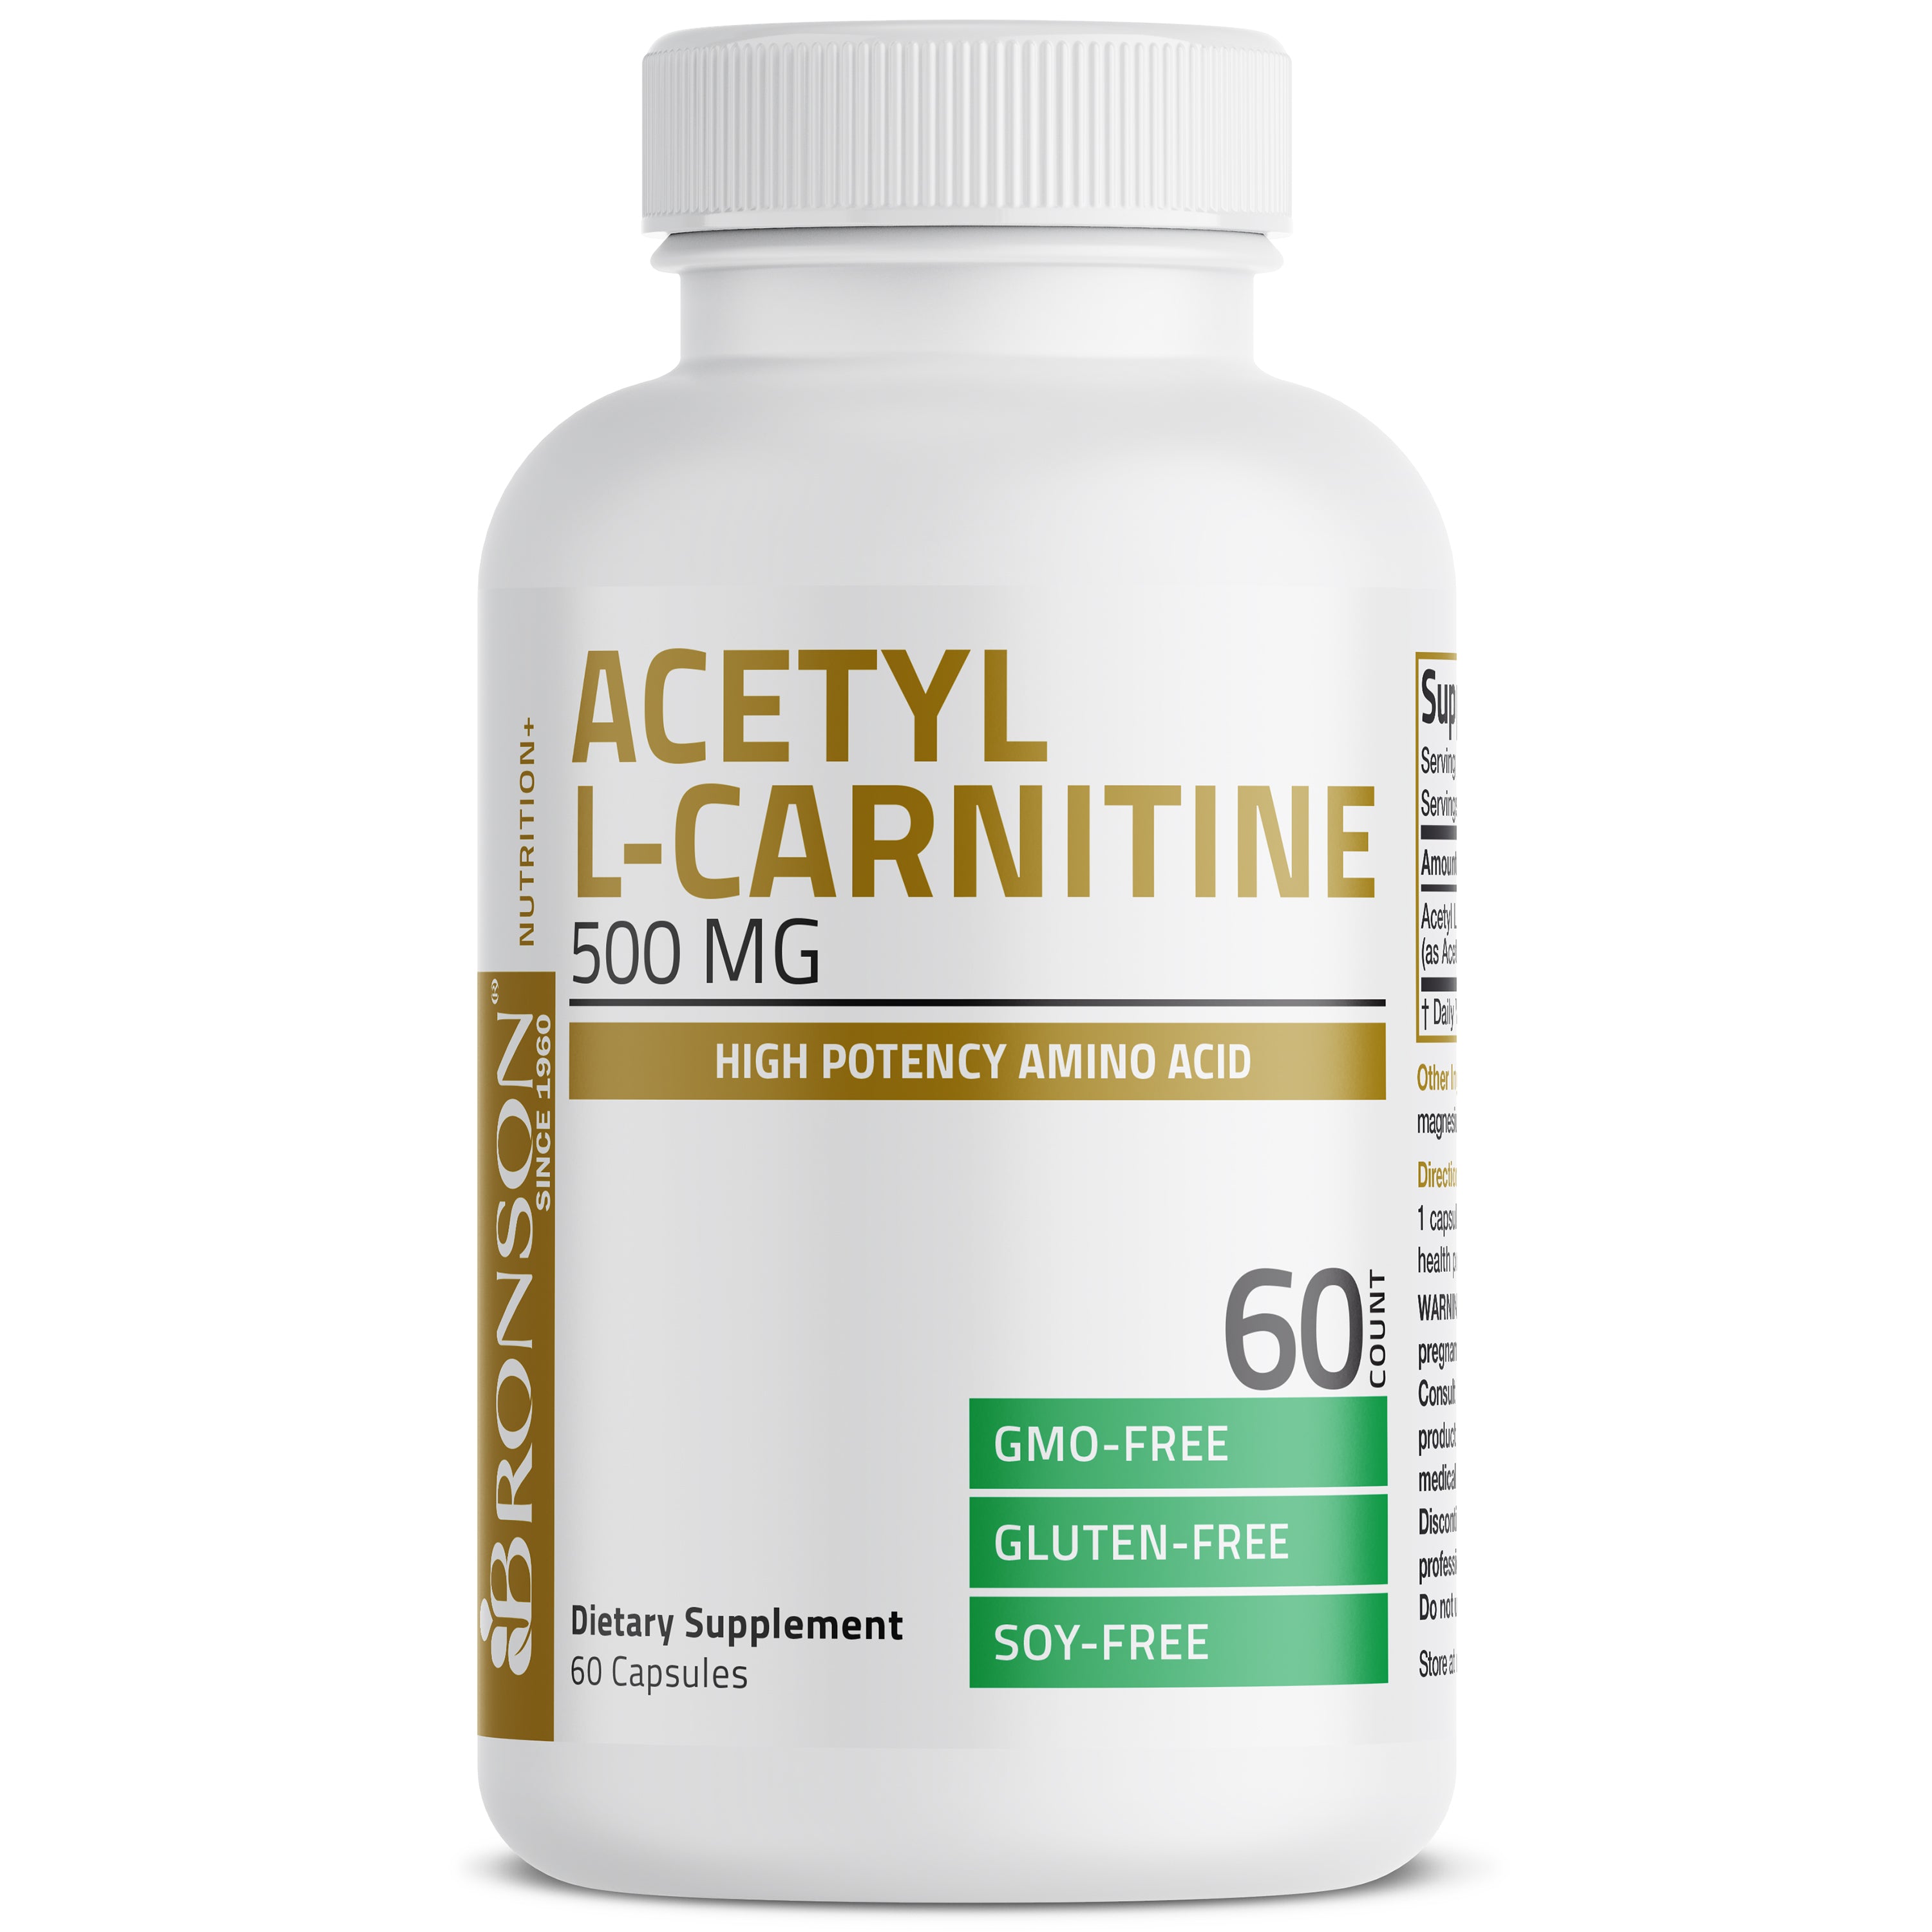 Acetyl L-Carnitine - 500 MG view 5 of 4